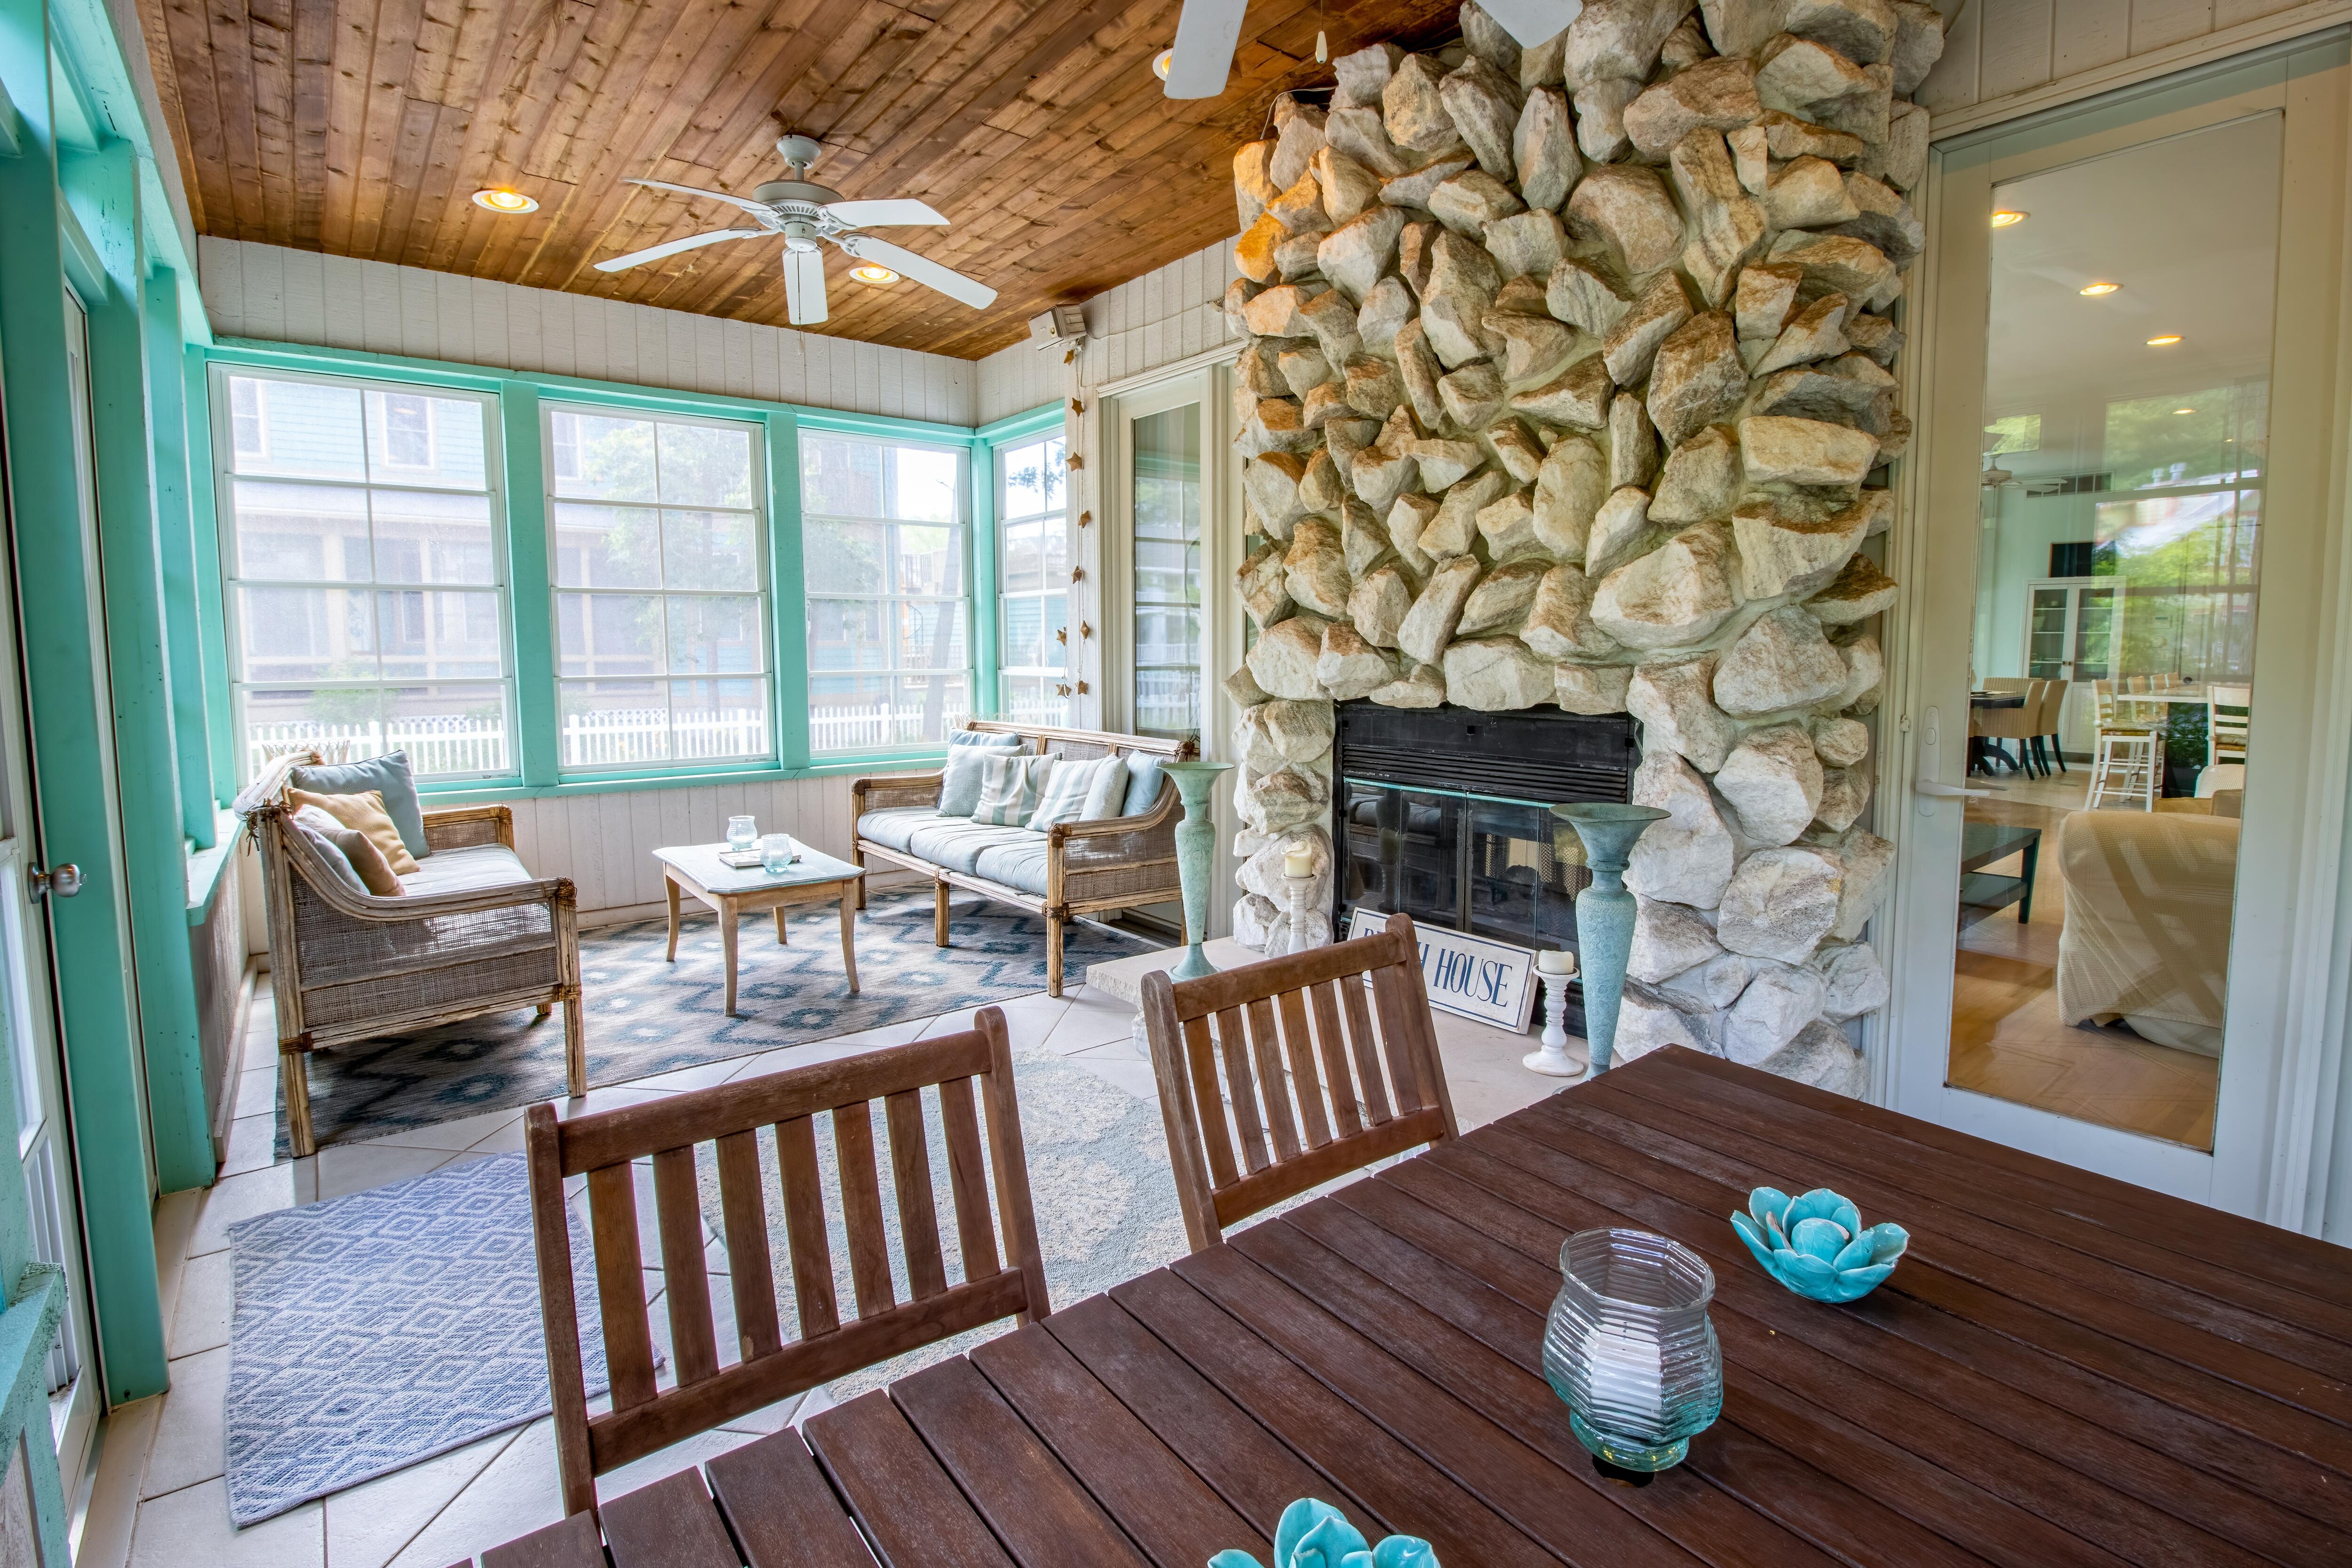 Main level 4 seasons porch with fireplace